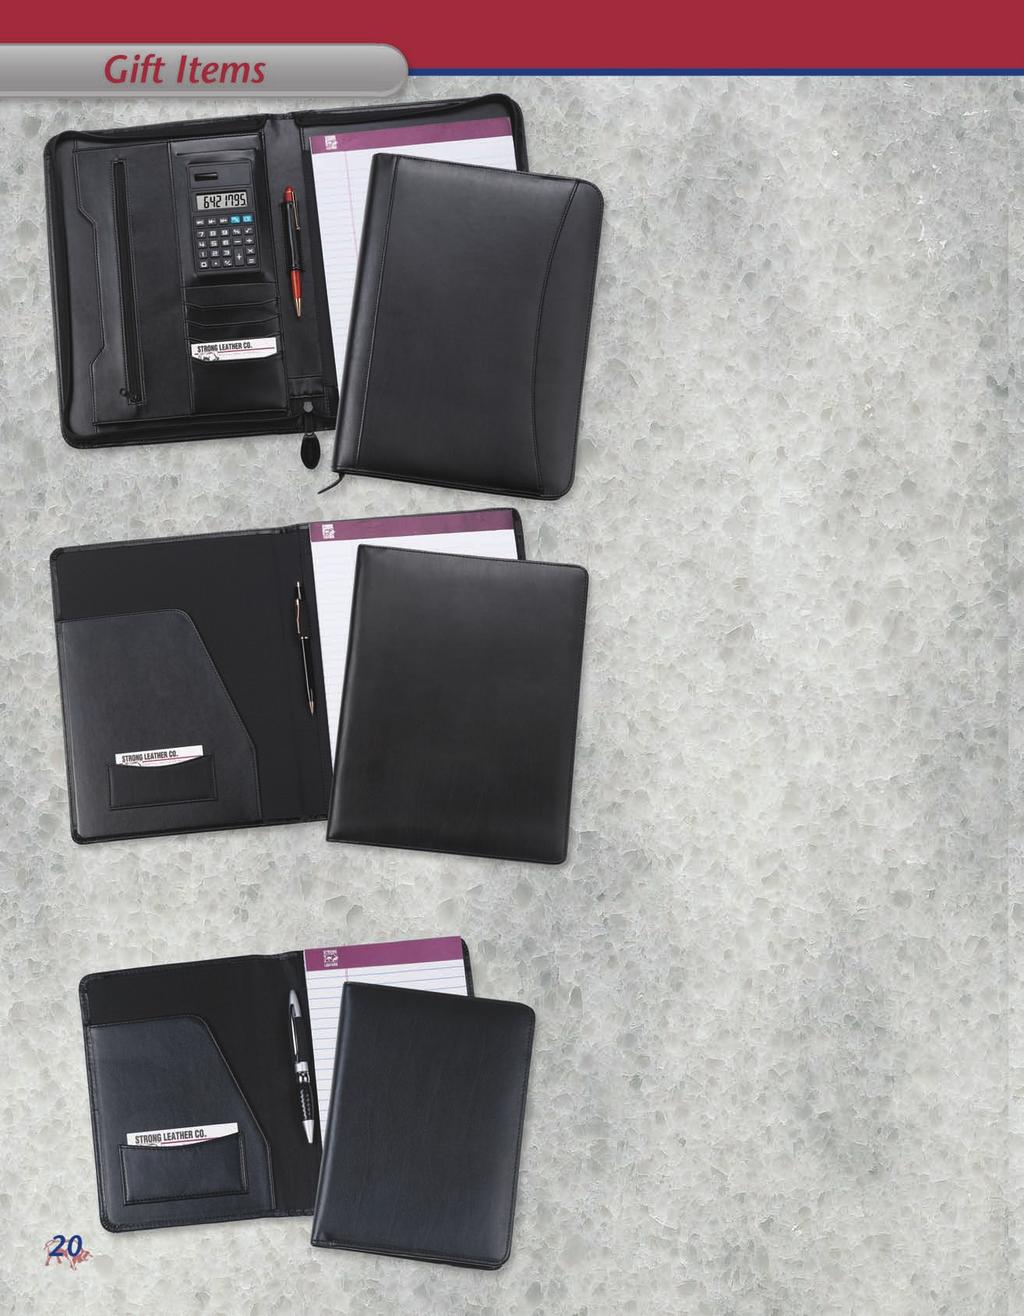 Zipper Portfolio 91000 This bonded leather zippered portfolio includes a solar powered calculator, front cover pocket, pen loop, 8 1/2" x 11" pad, large gusseted pocket, zippered pocket and four card